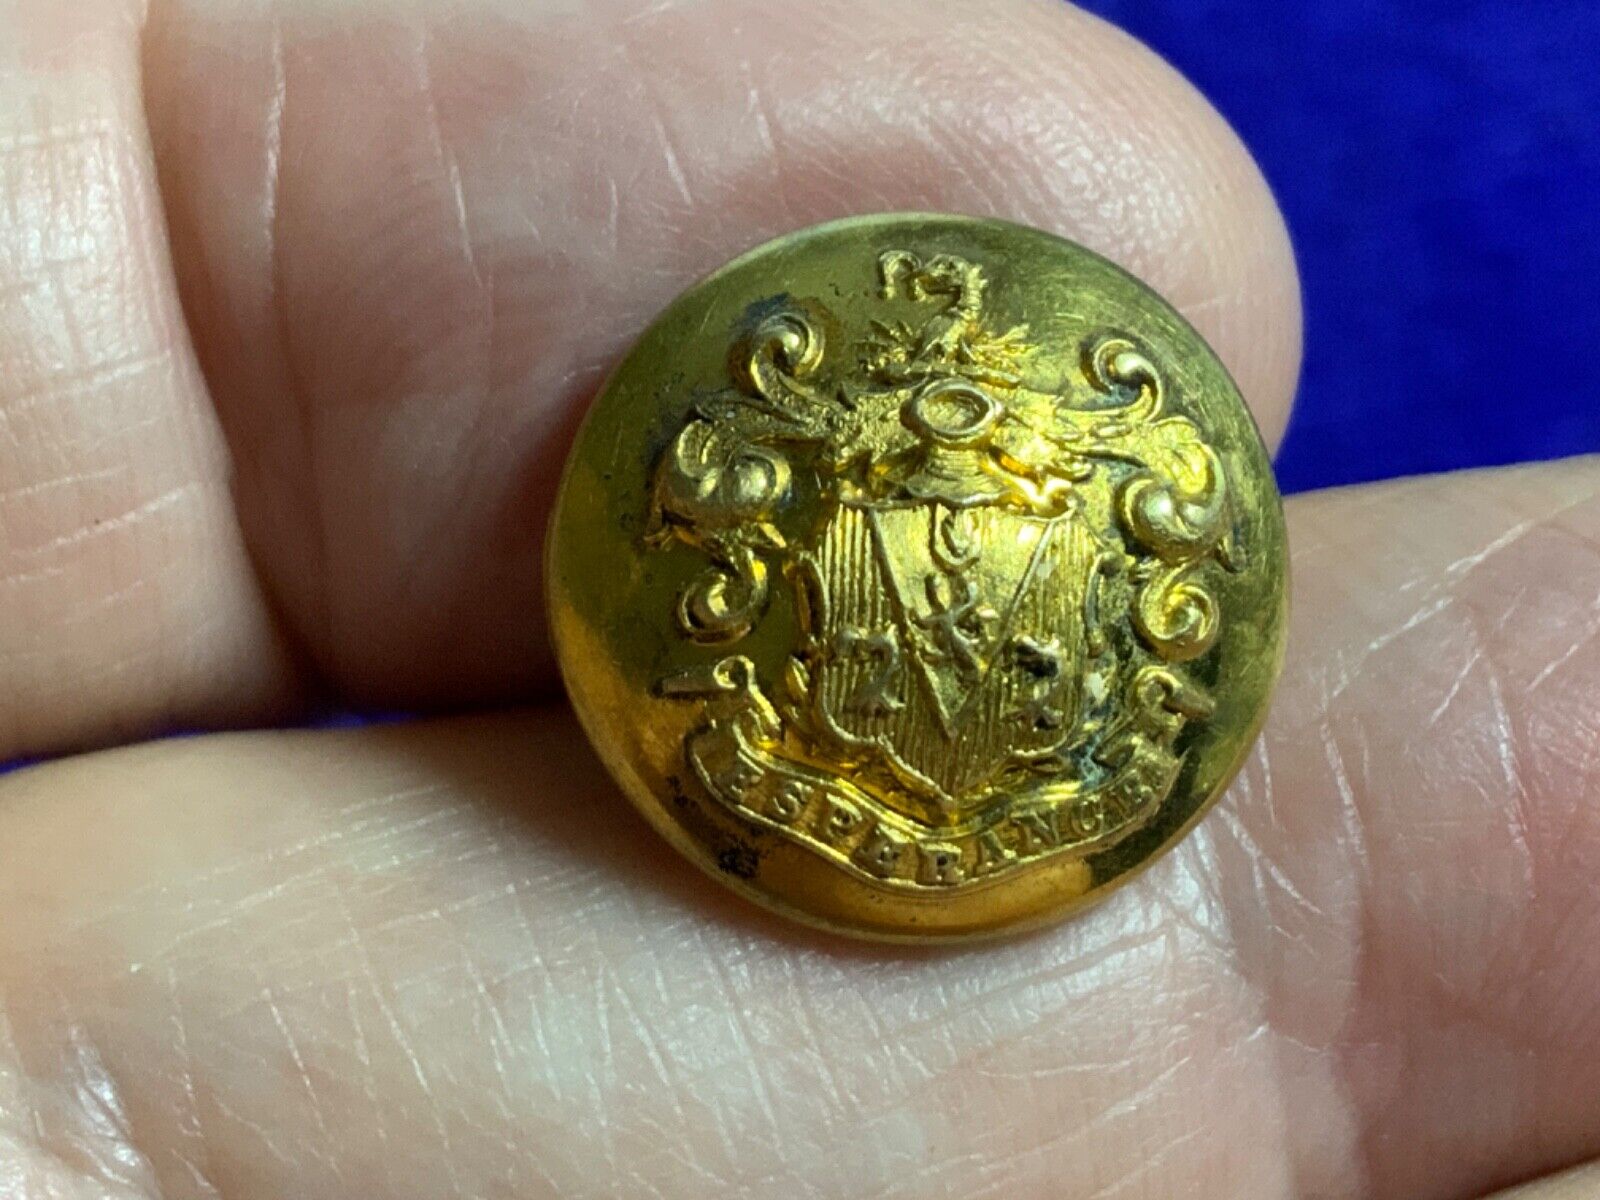 SIR RICHARD WALLACE, 1st Baronet COAT OF ARMS w MOTTO GILT 17mm CUFF BUTTON 1871